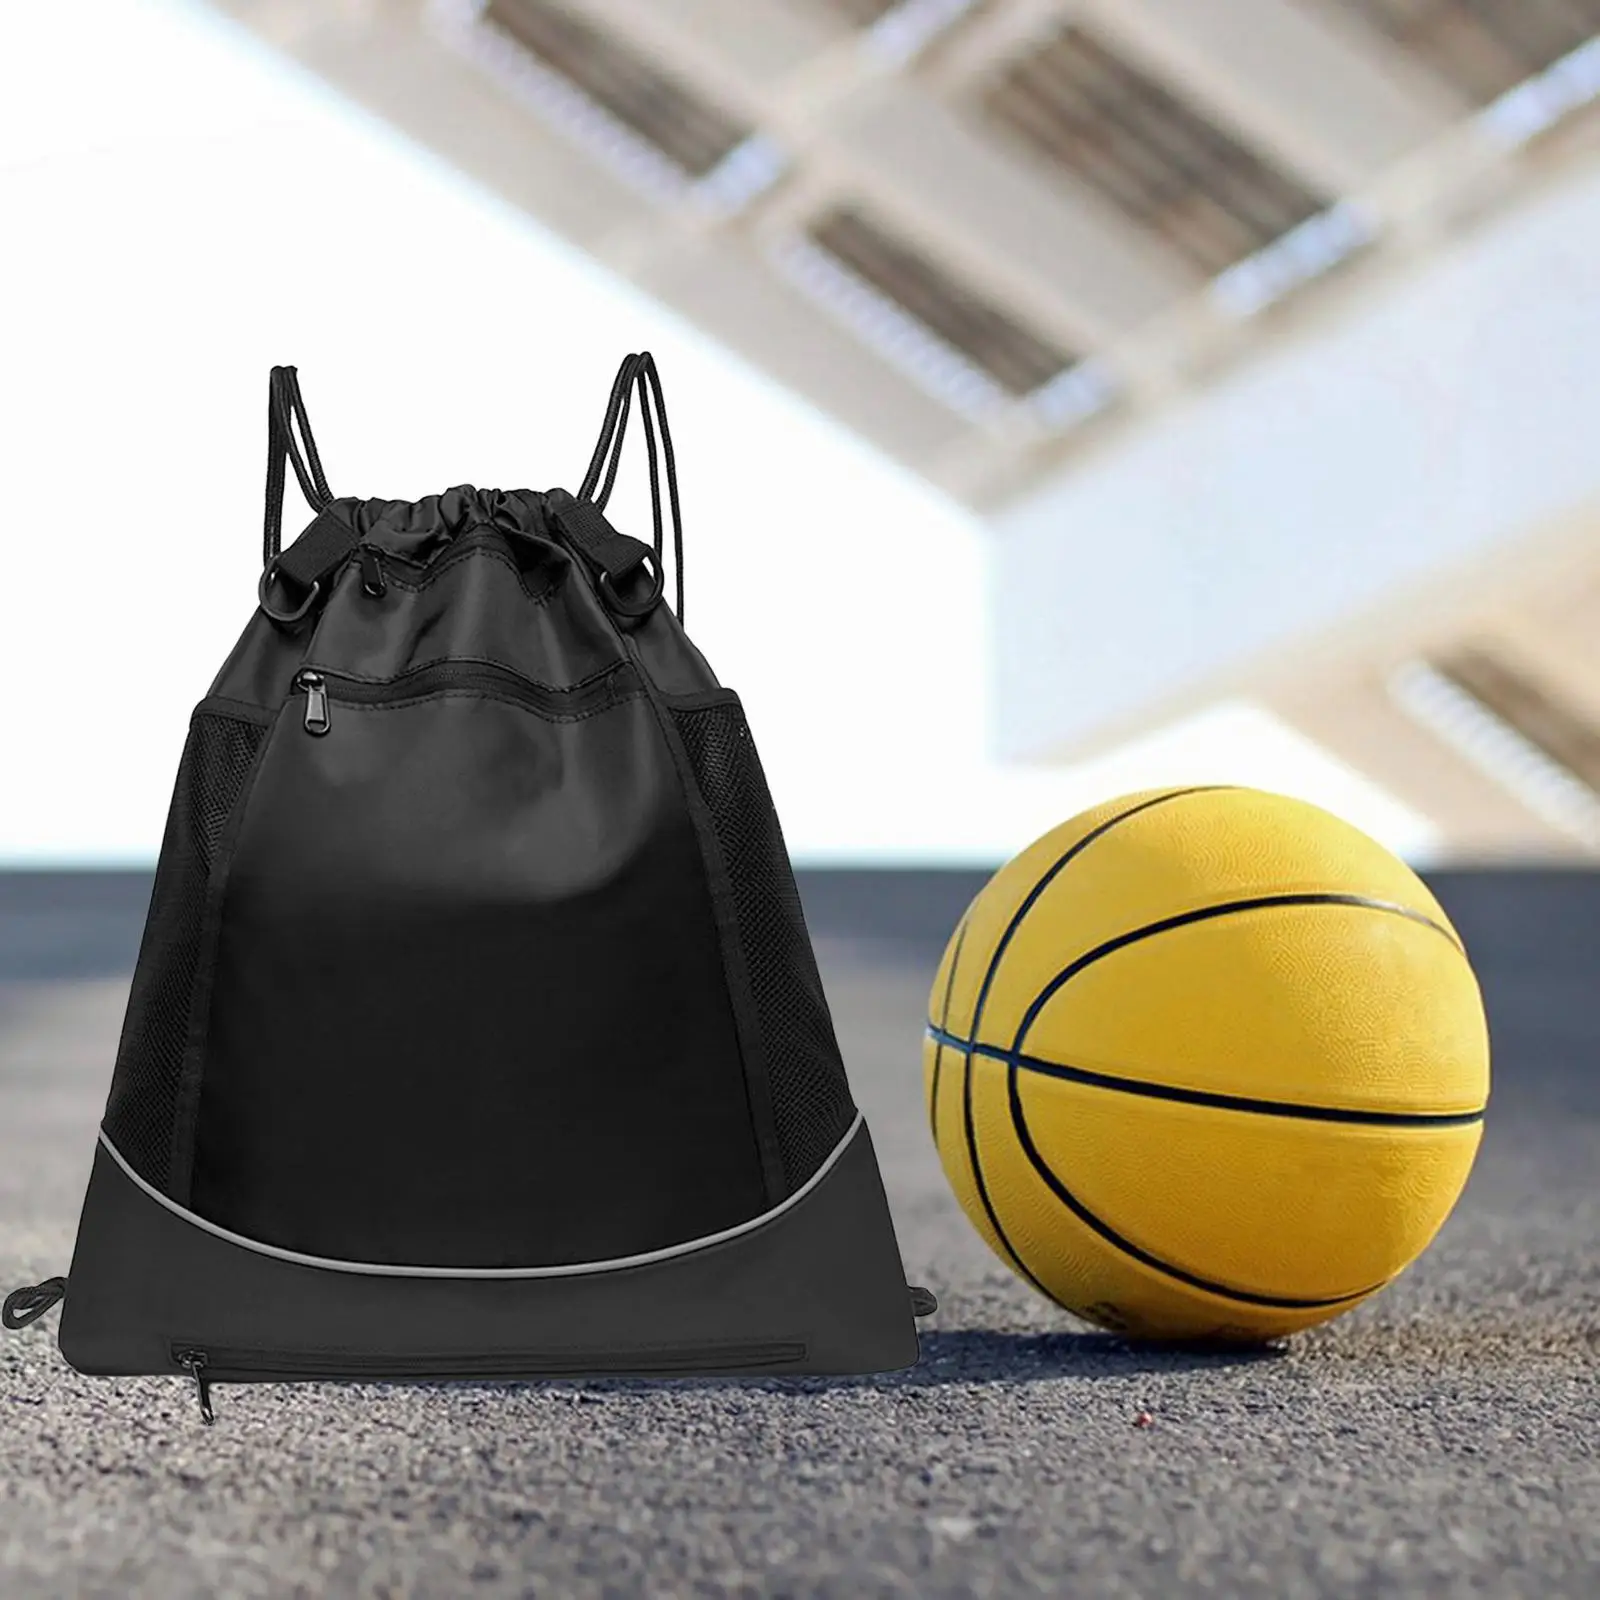 Basketball Bag Backpack with Ball Compartment Lightweight Drawstring Backpack